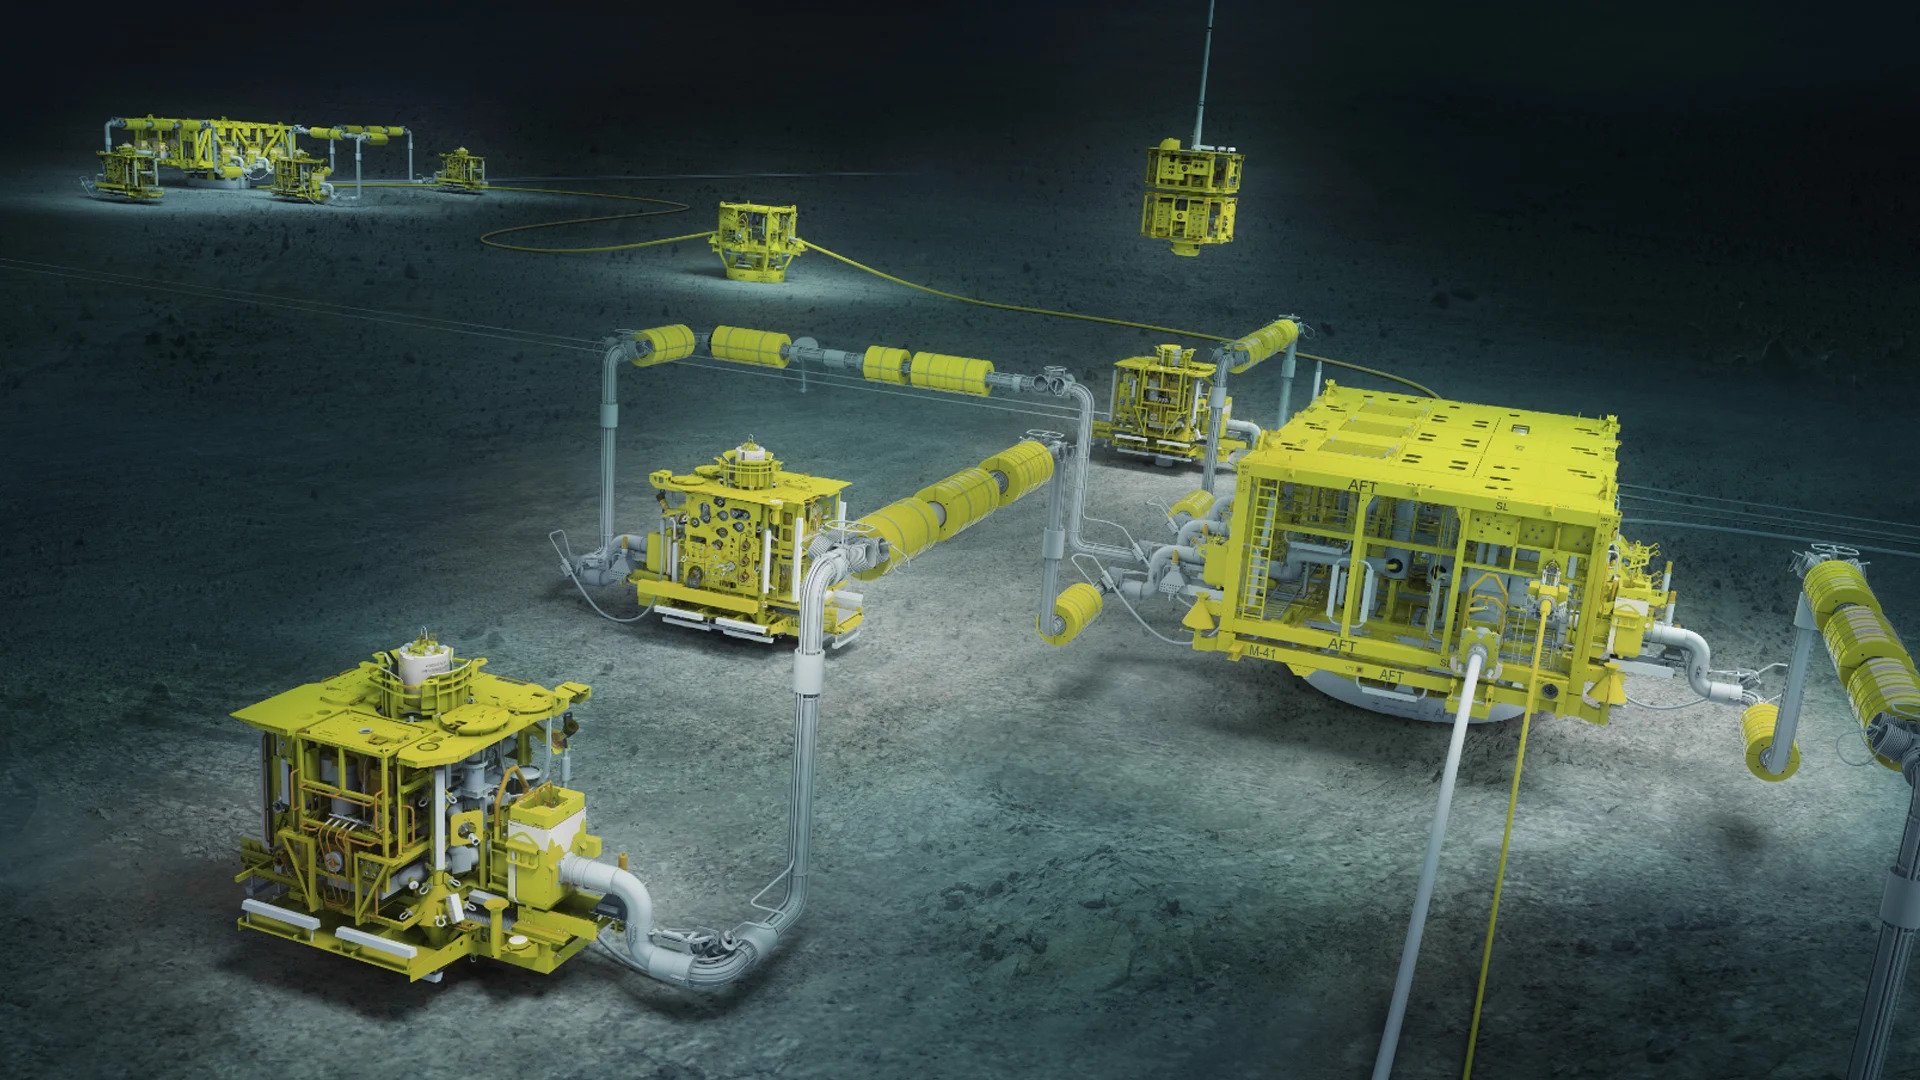 subsea_production_system_mohonord_01_1920x1080.jpg